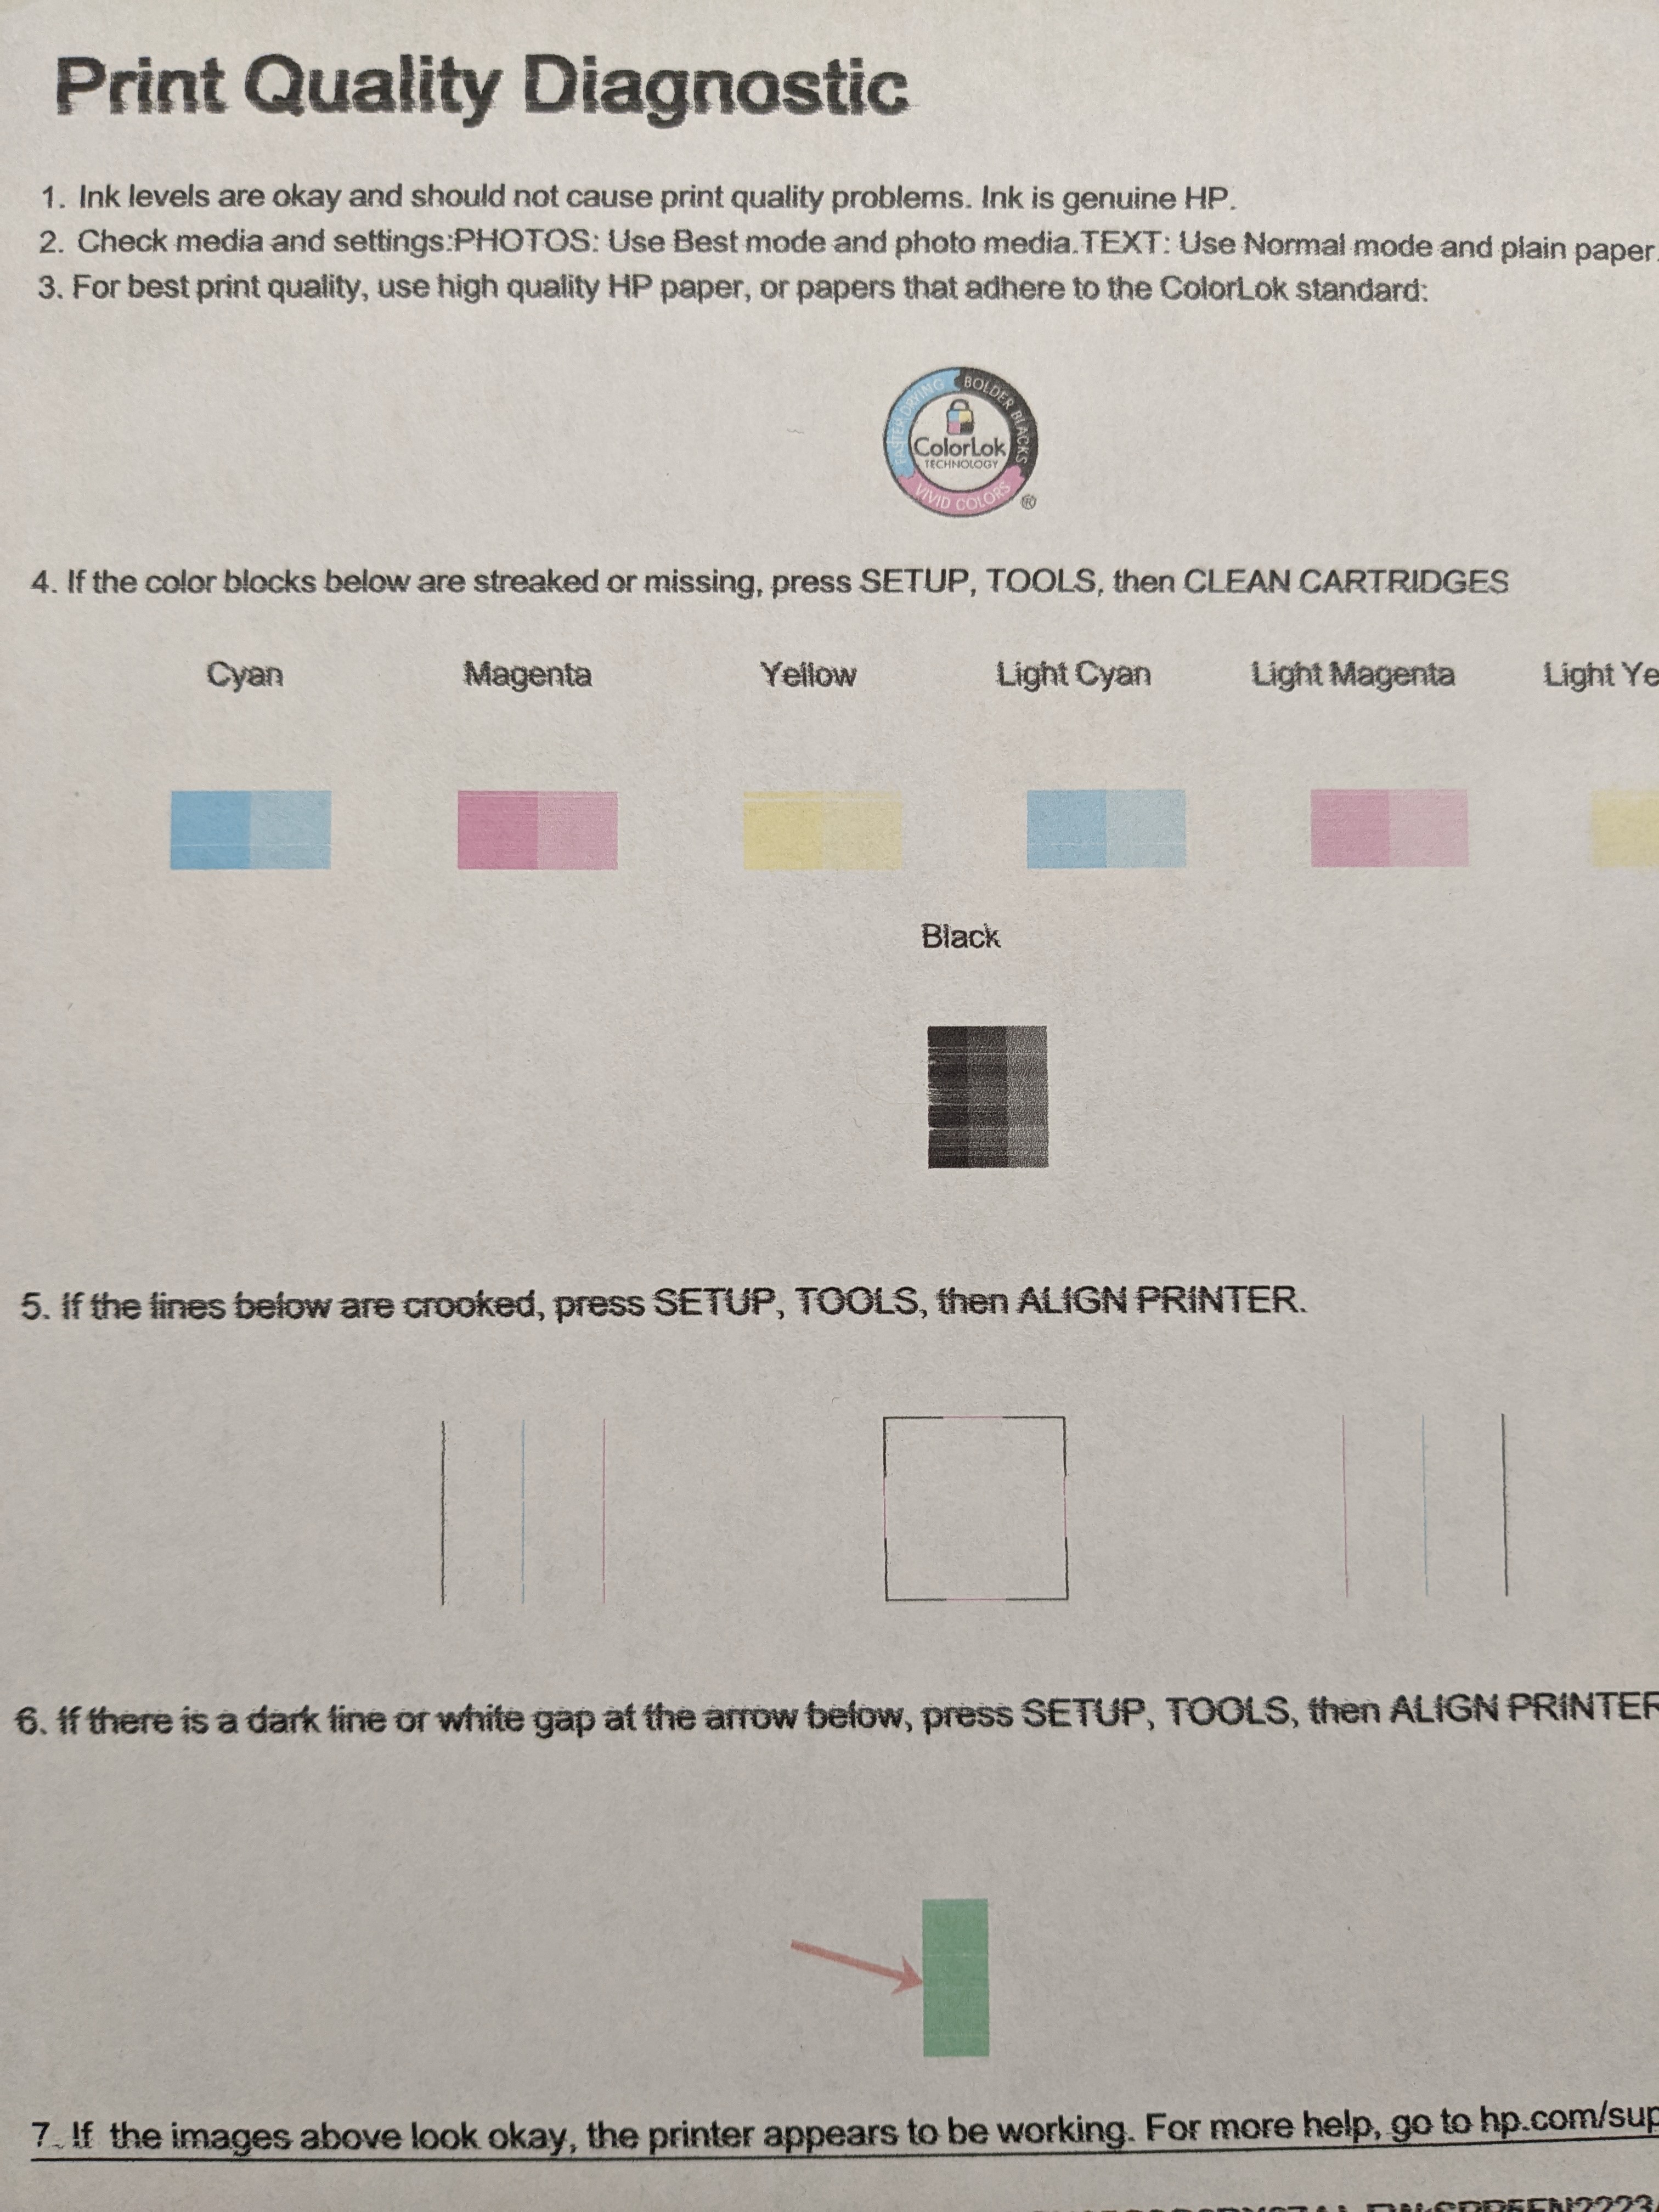 Printing Sporadically Distorted Text - HP Support Community - 8563859